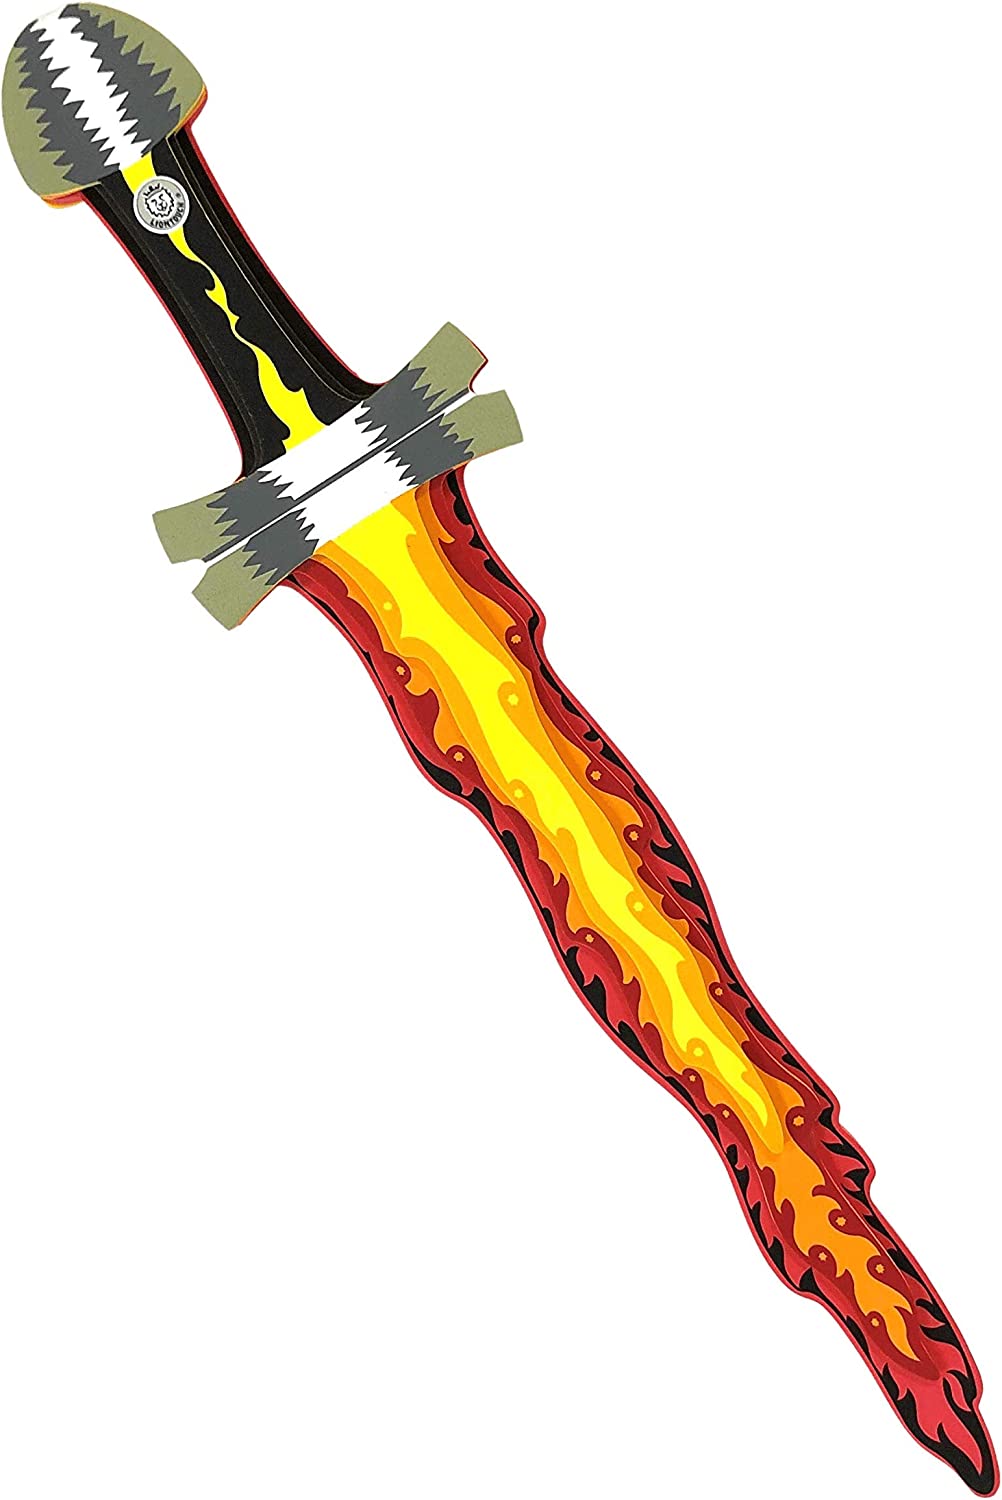 Flame Sword by Liontouch